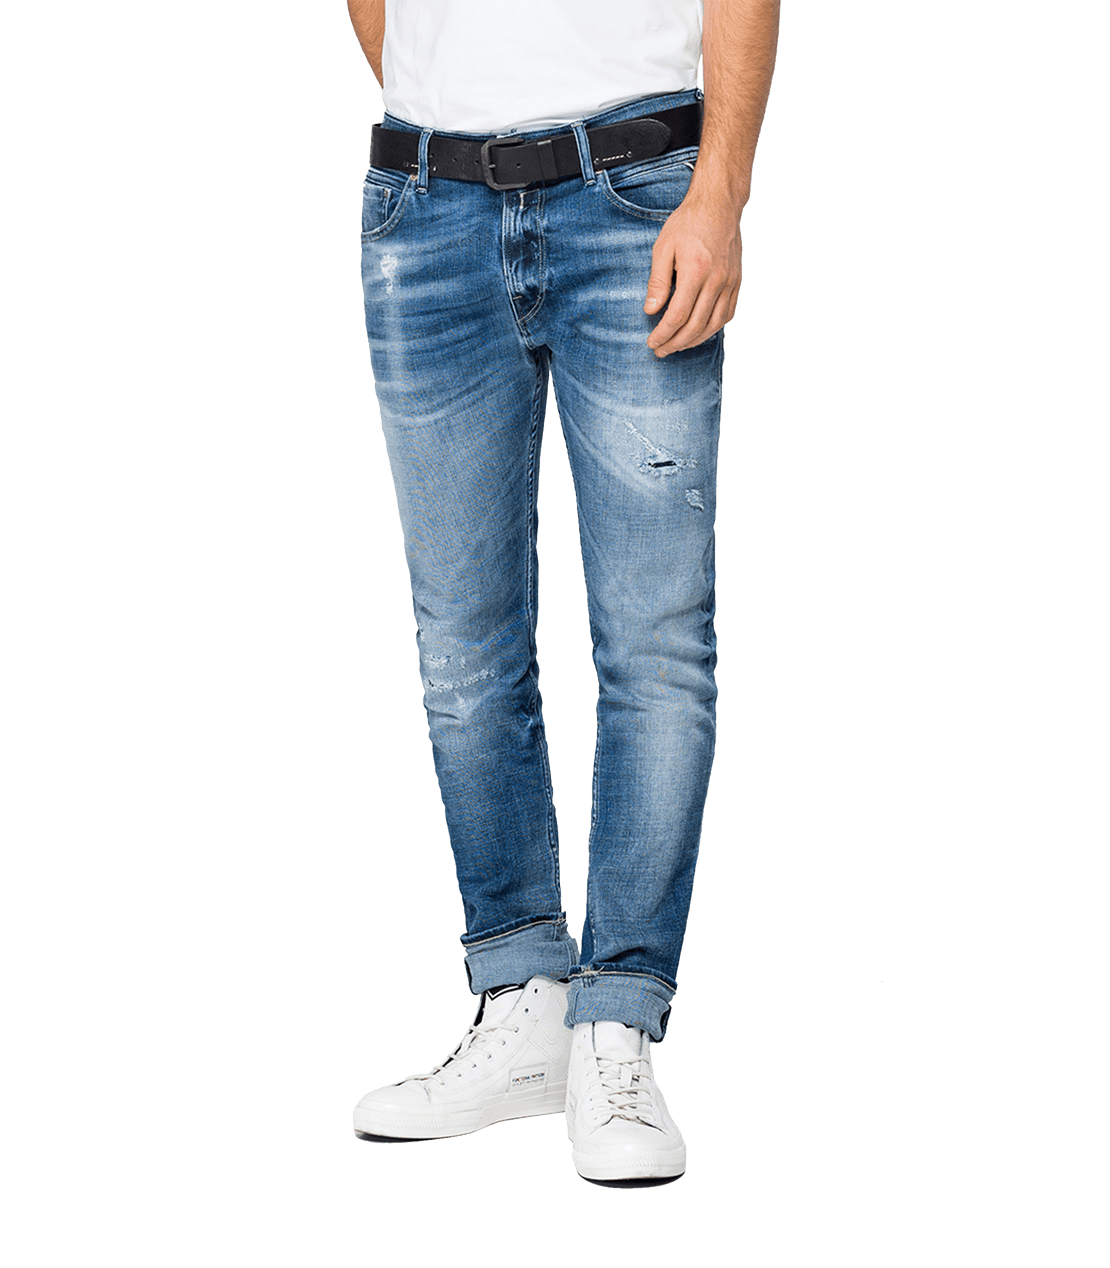 SKINNY FIT AGED 10 YEARS SUSTAINABLE CYCLE JONDRILL JEANS